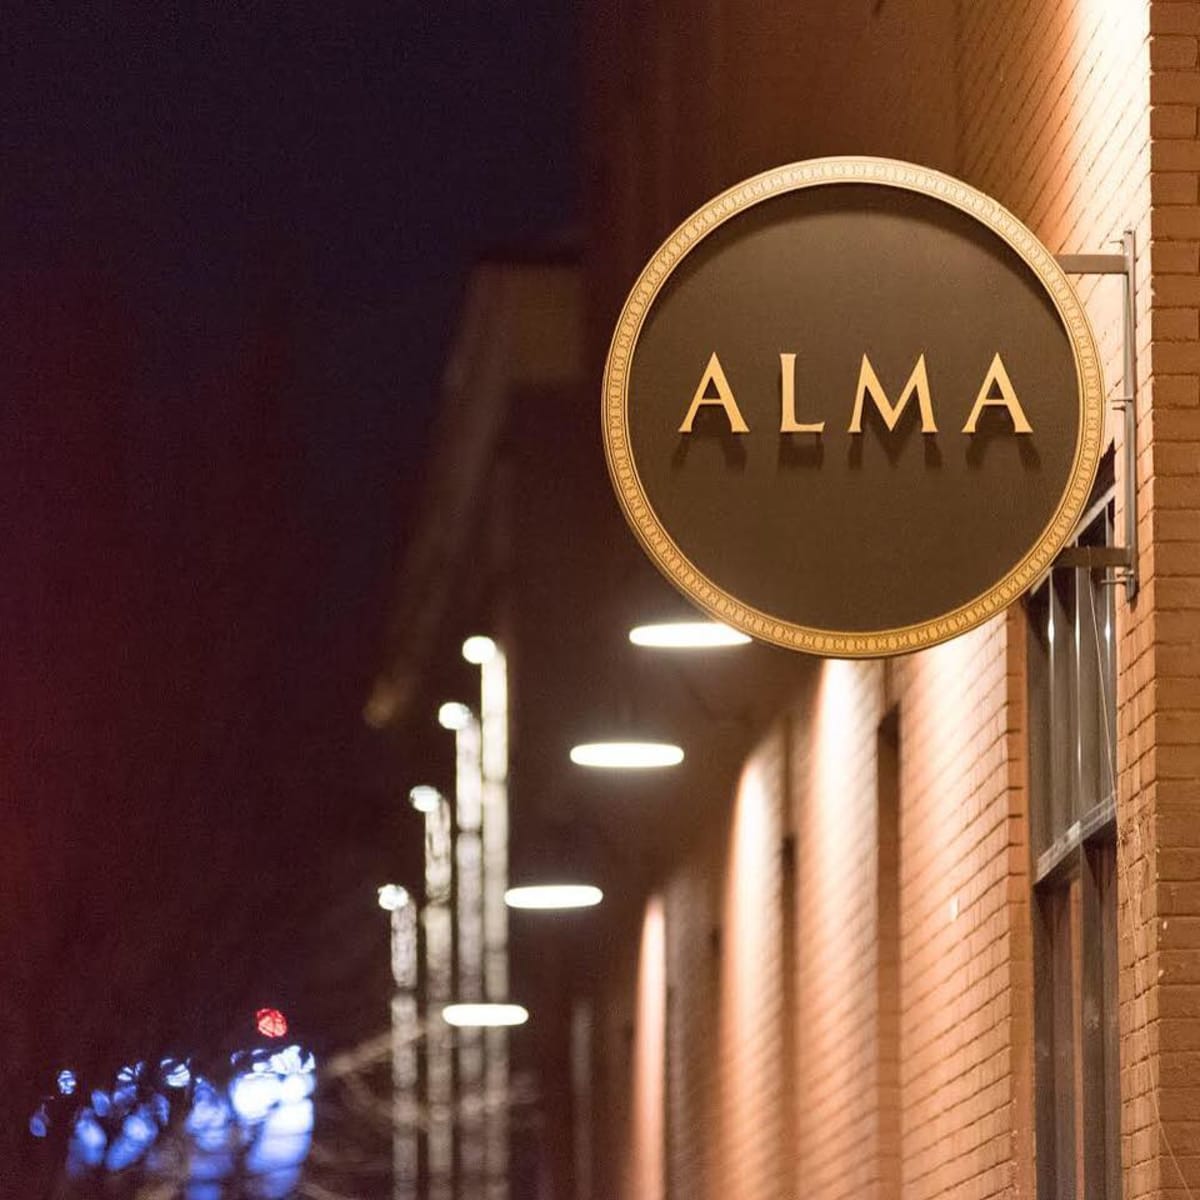 Restaurant Alma Opts To Close Indoor Dining For Winter Months For Pandemic Safety Bring Me The News